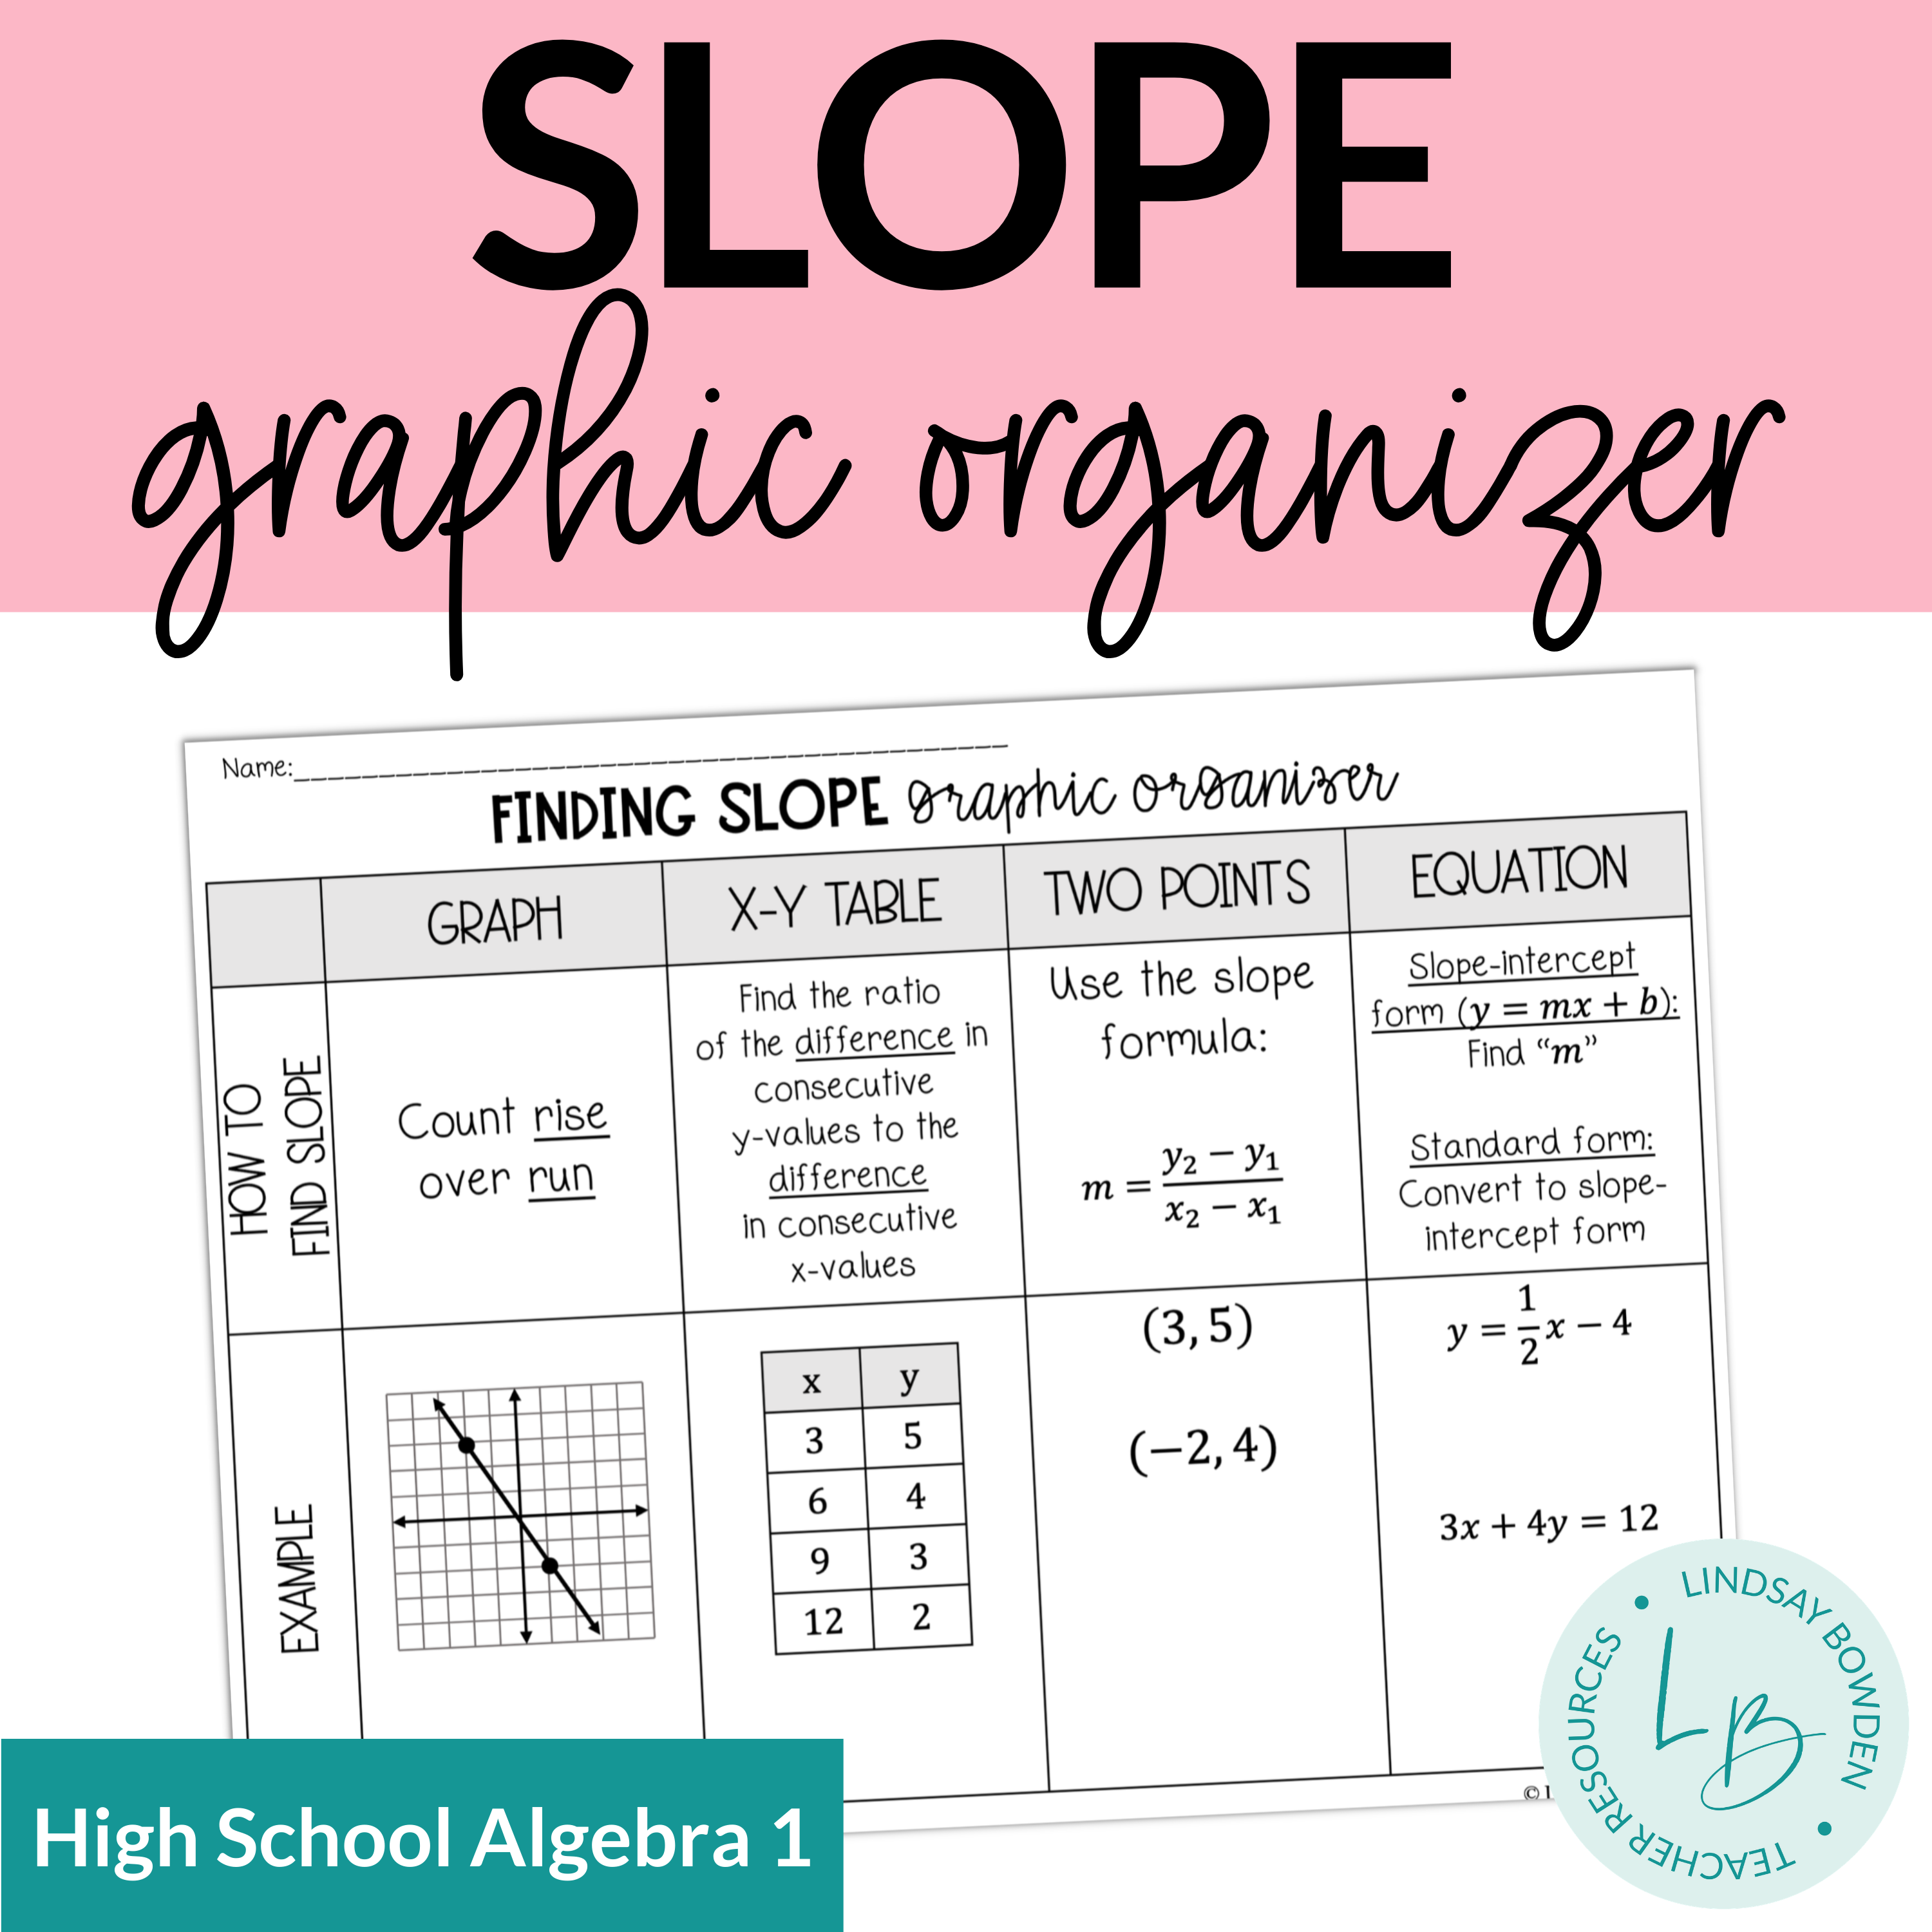 view slop in graphical analysis mac